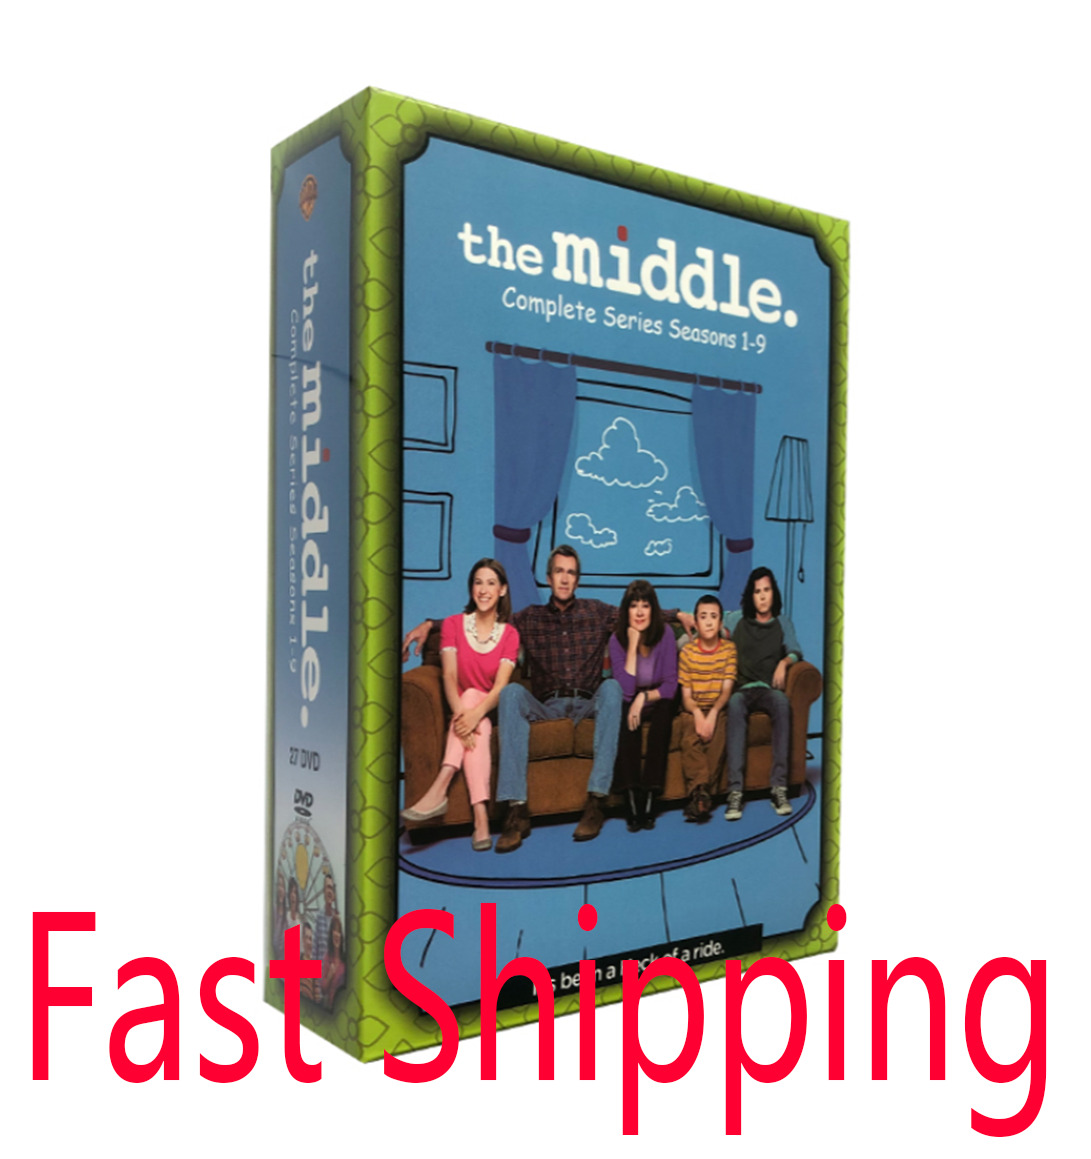 The Middle: The Complete Series Seasons 1-9 DVD 27 Discs US STOCK FAST SHIPPING